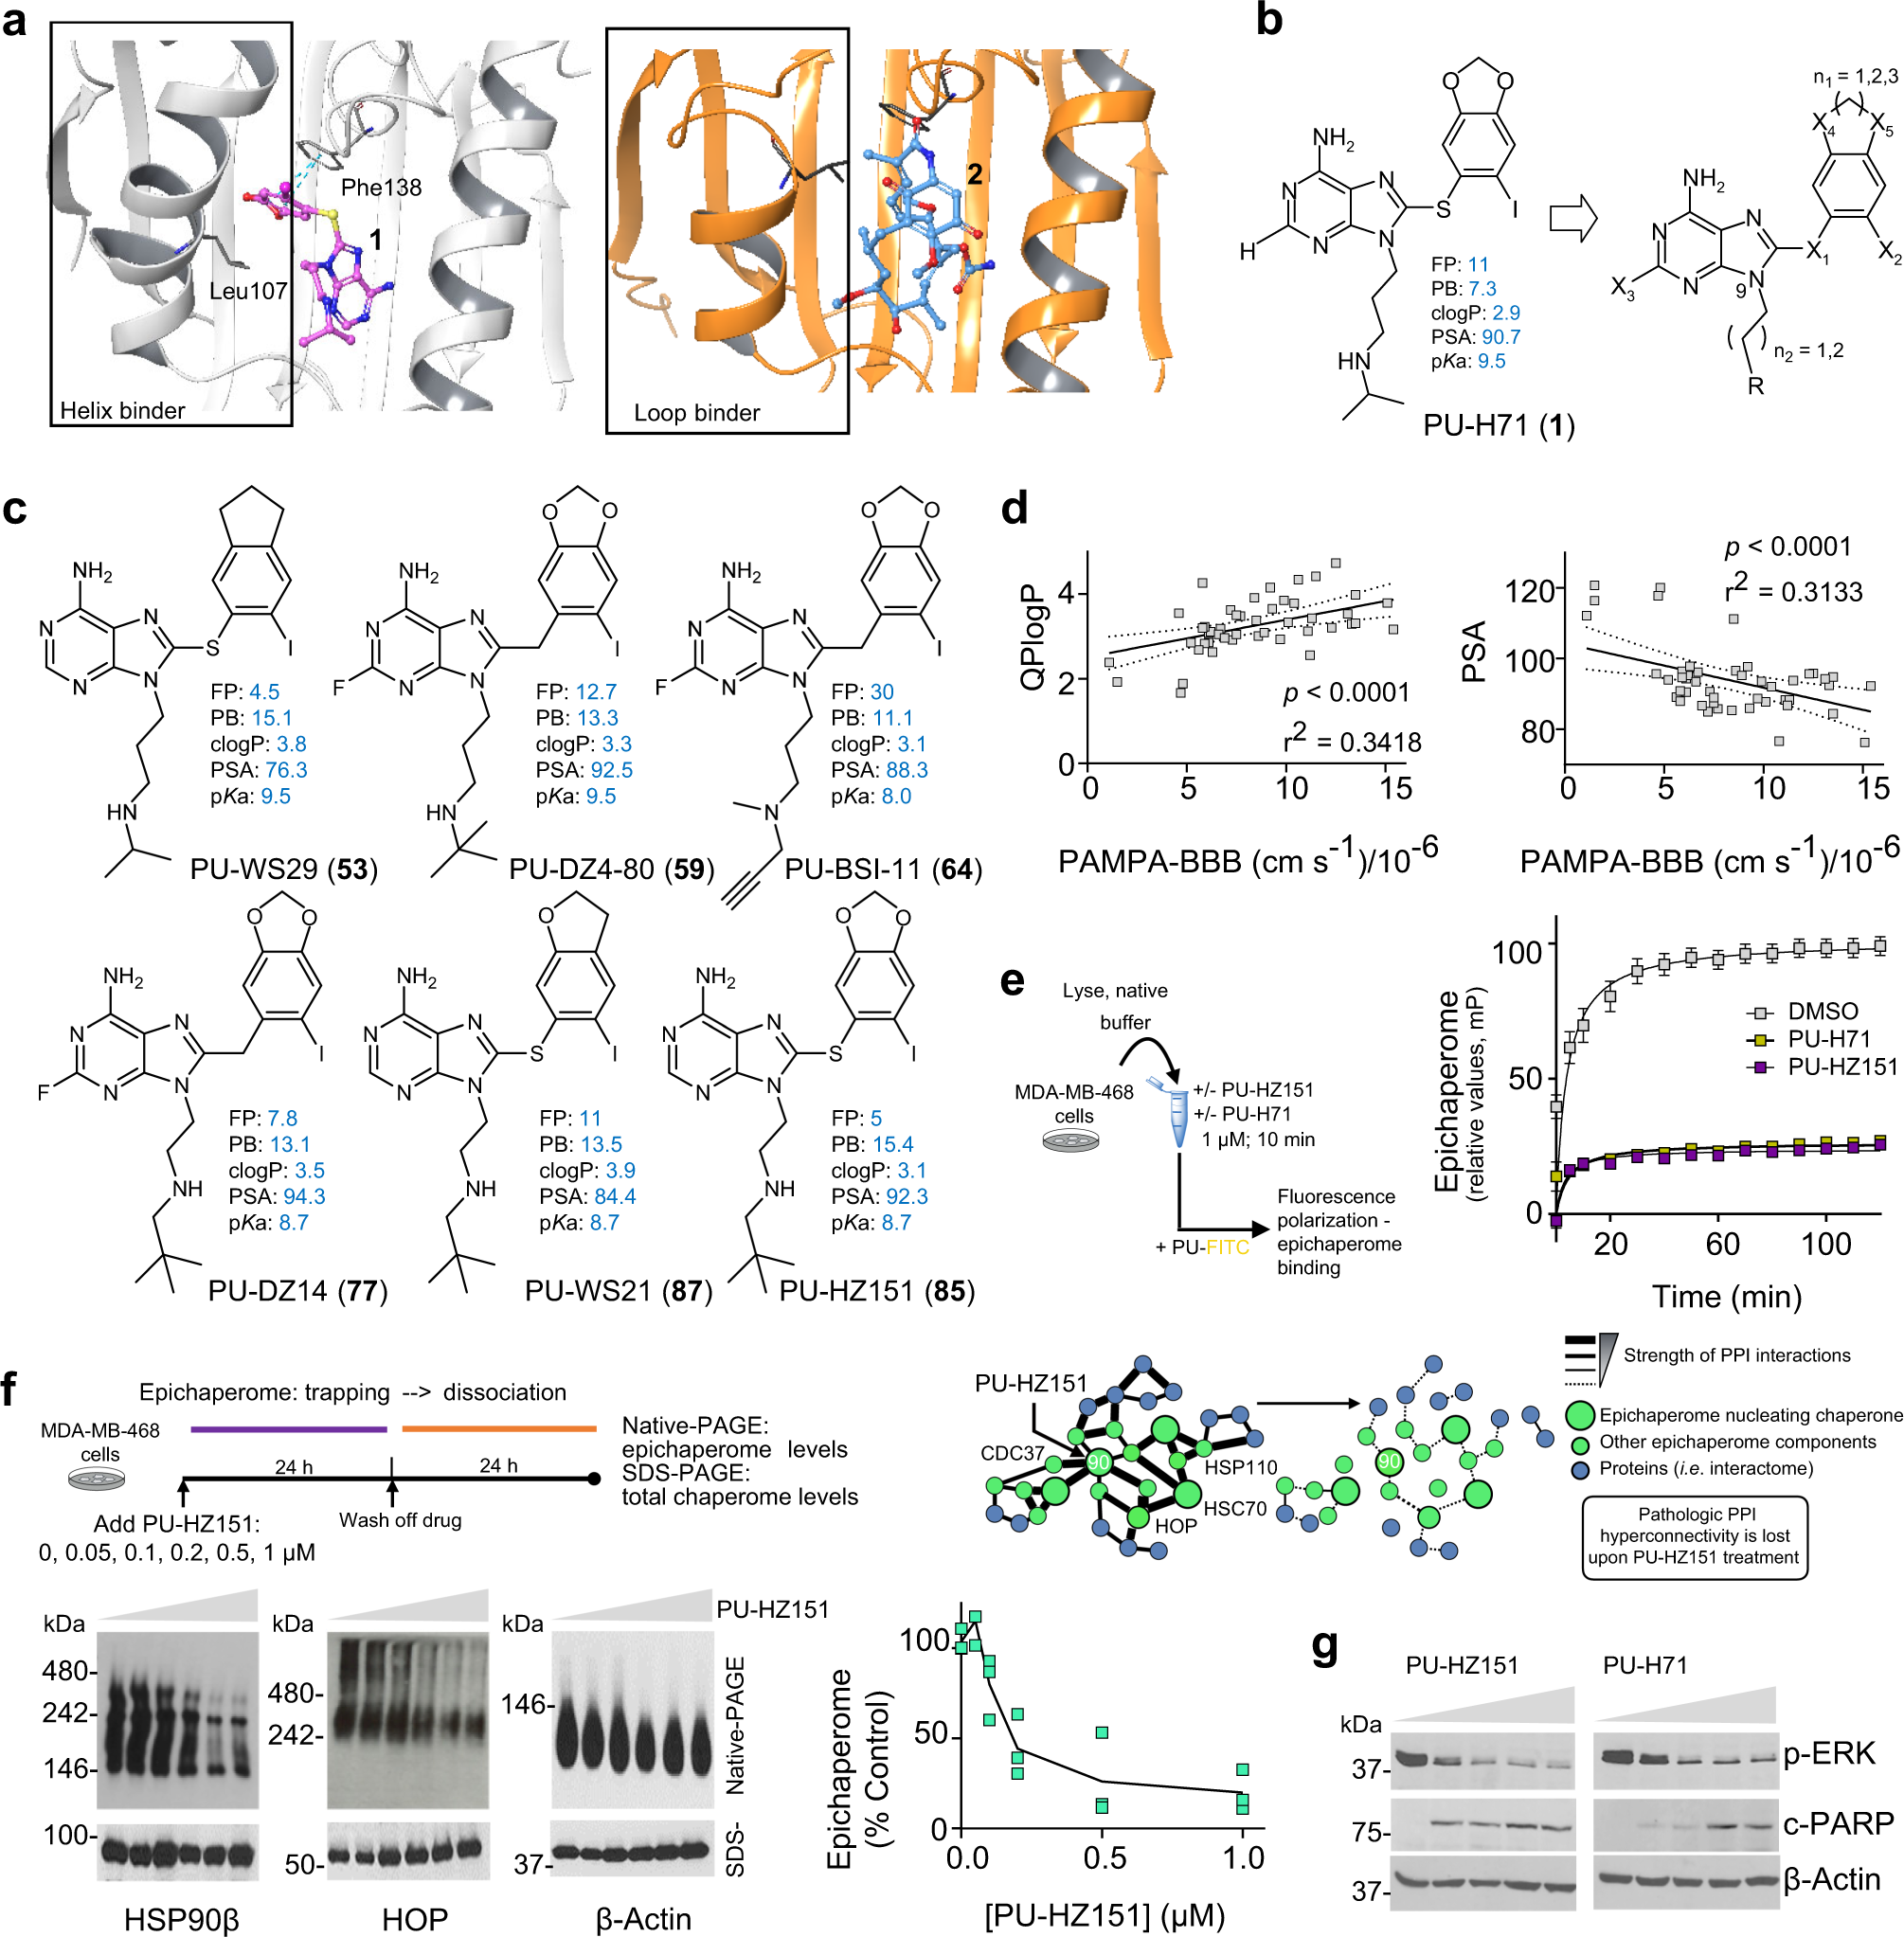 Chemical tools for epichaperome-mediated interactome dysfunctions of the  central nervous system | Nature Communications